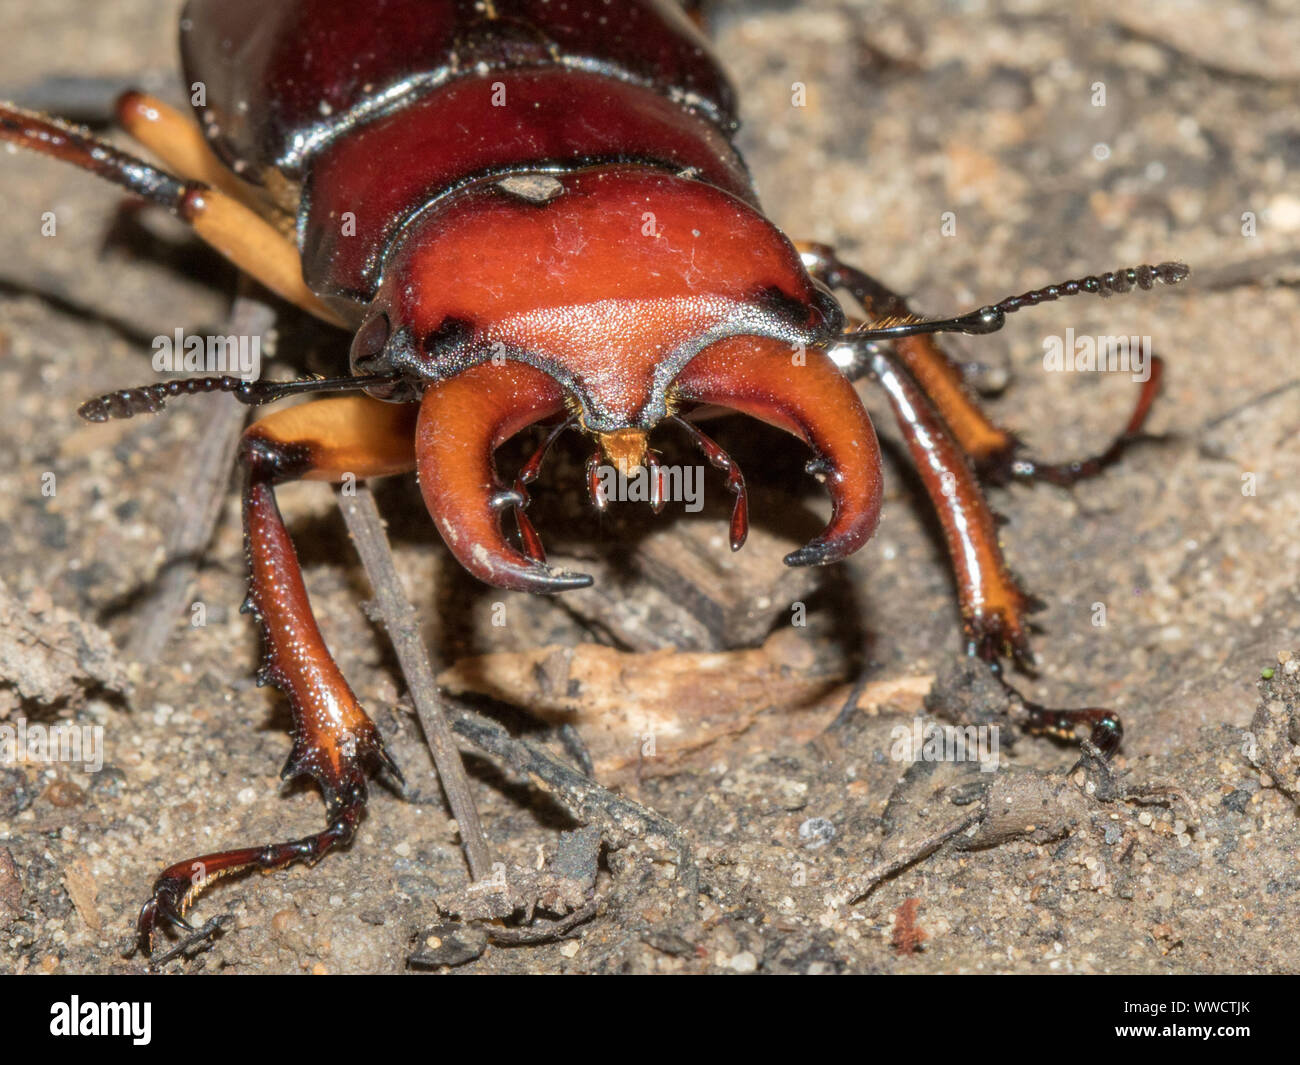 Close-up of the mandibles of a male stag beetle, Lucanus sp. Stock Photo